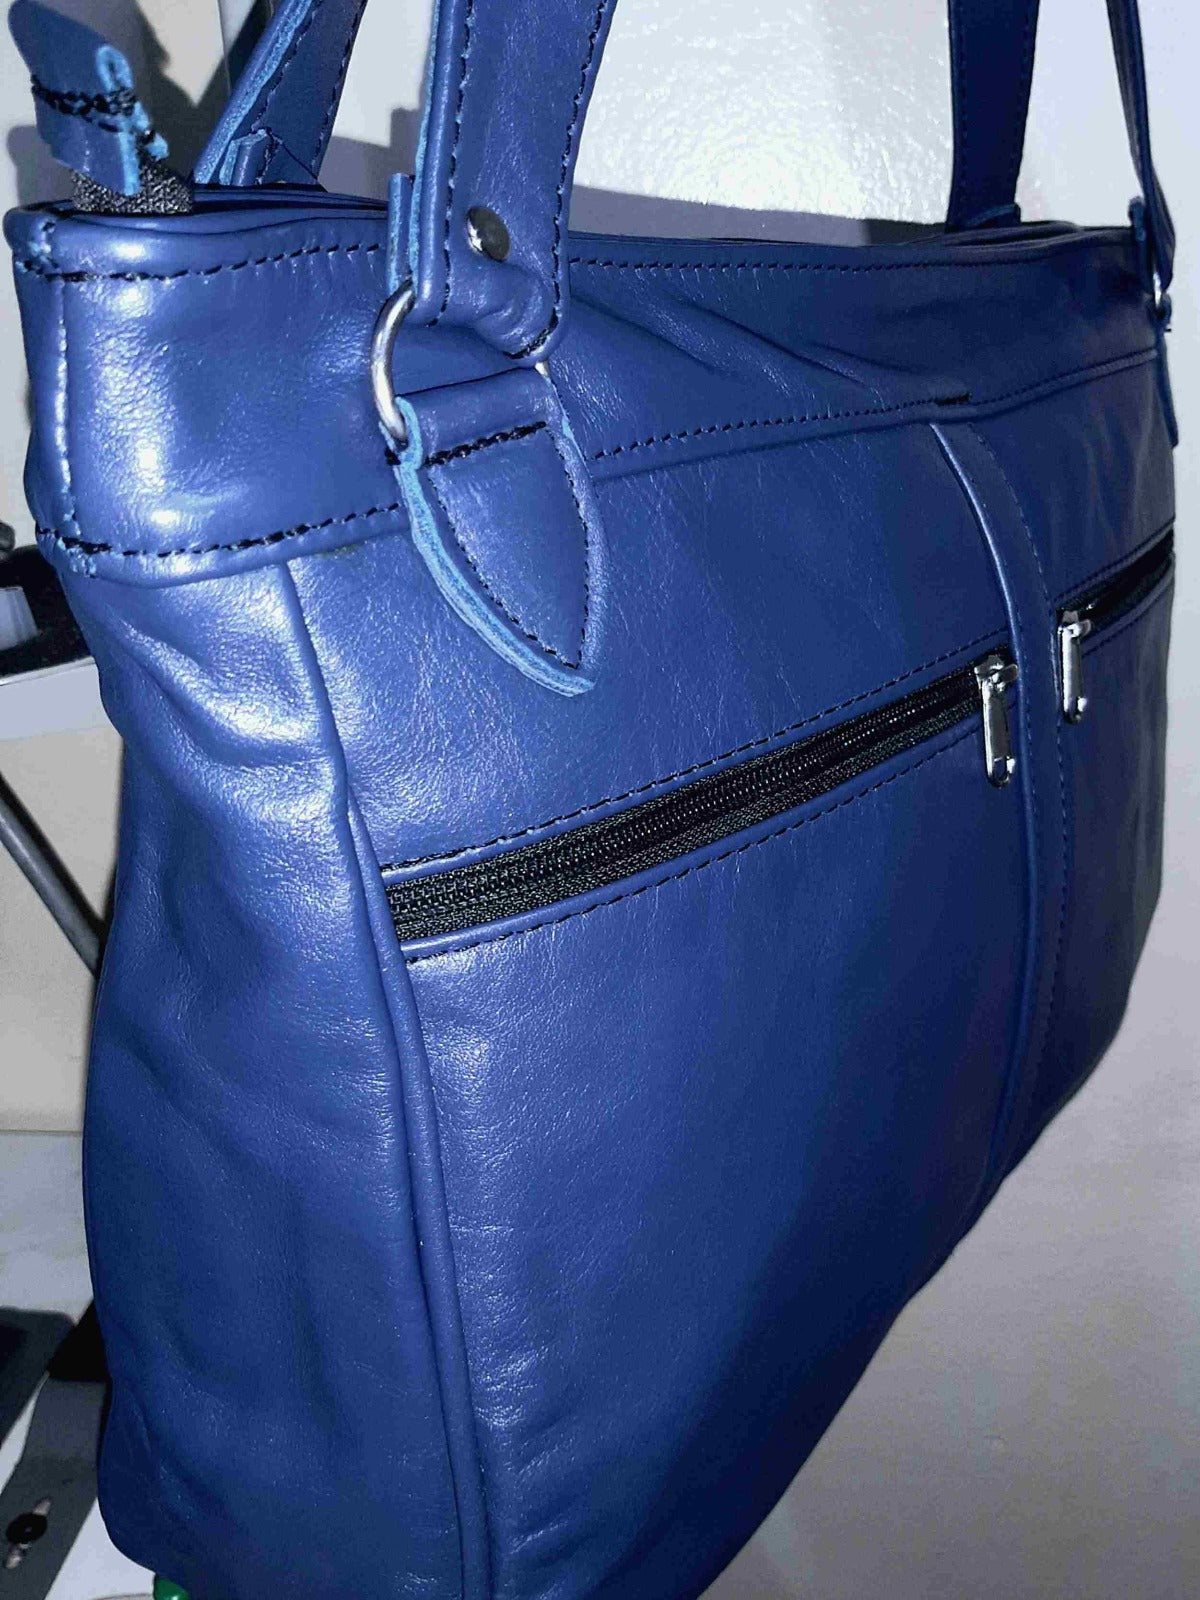 Tote leather bags Xl in navy blue colour made by  cape Masai Leather